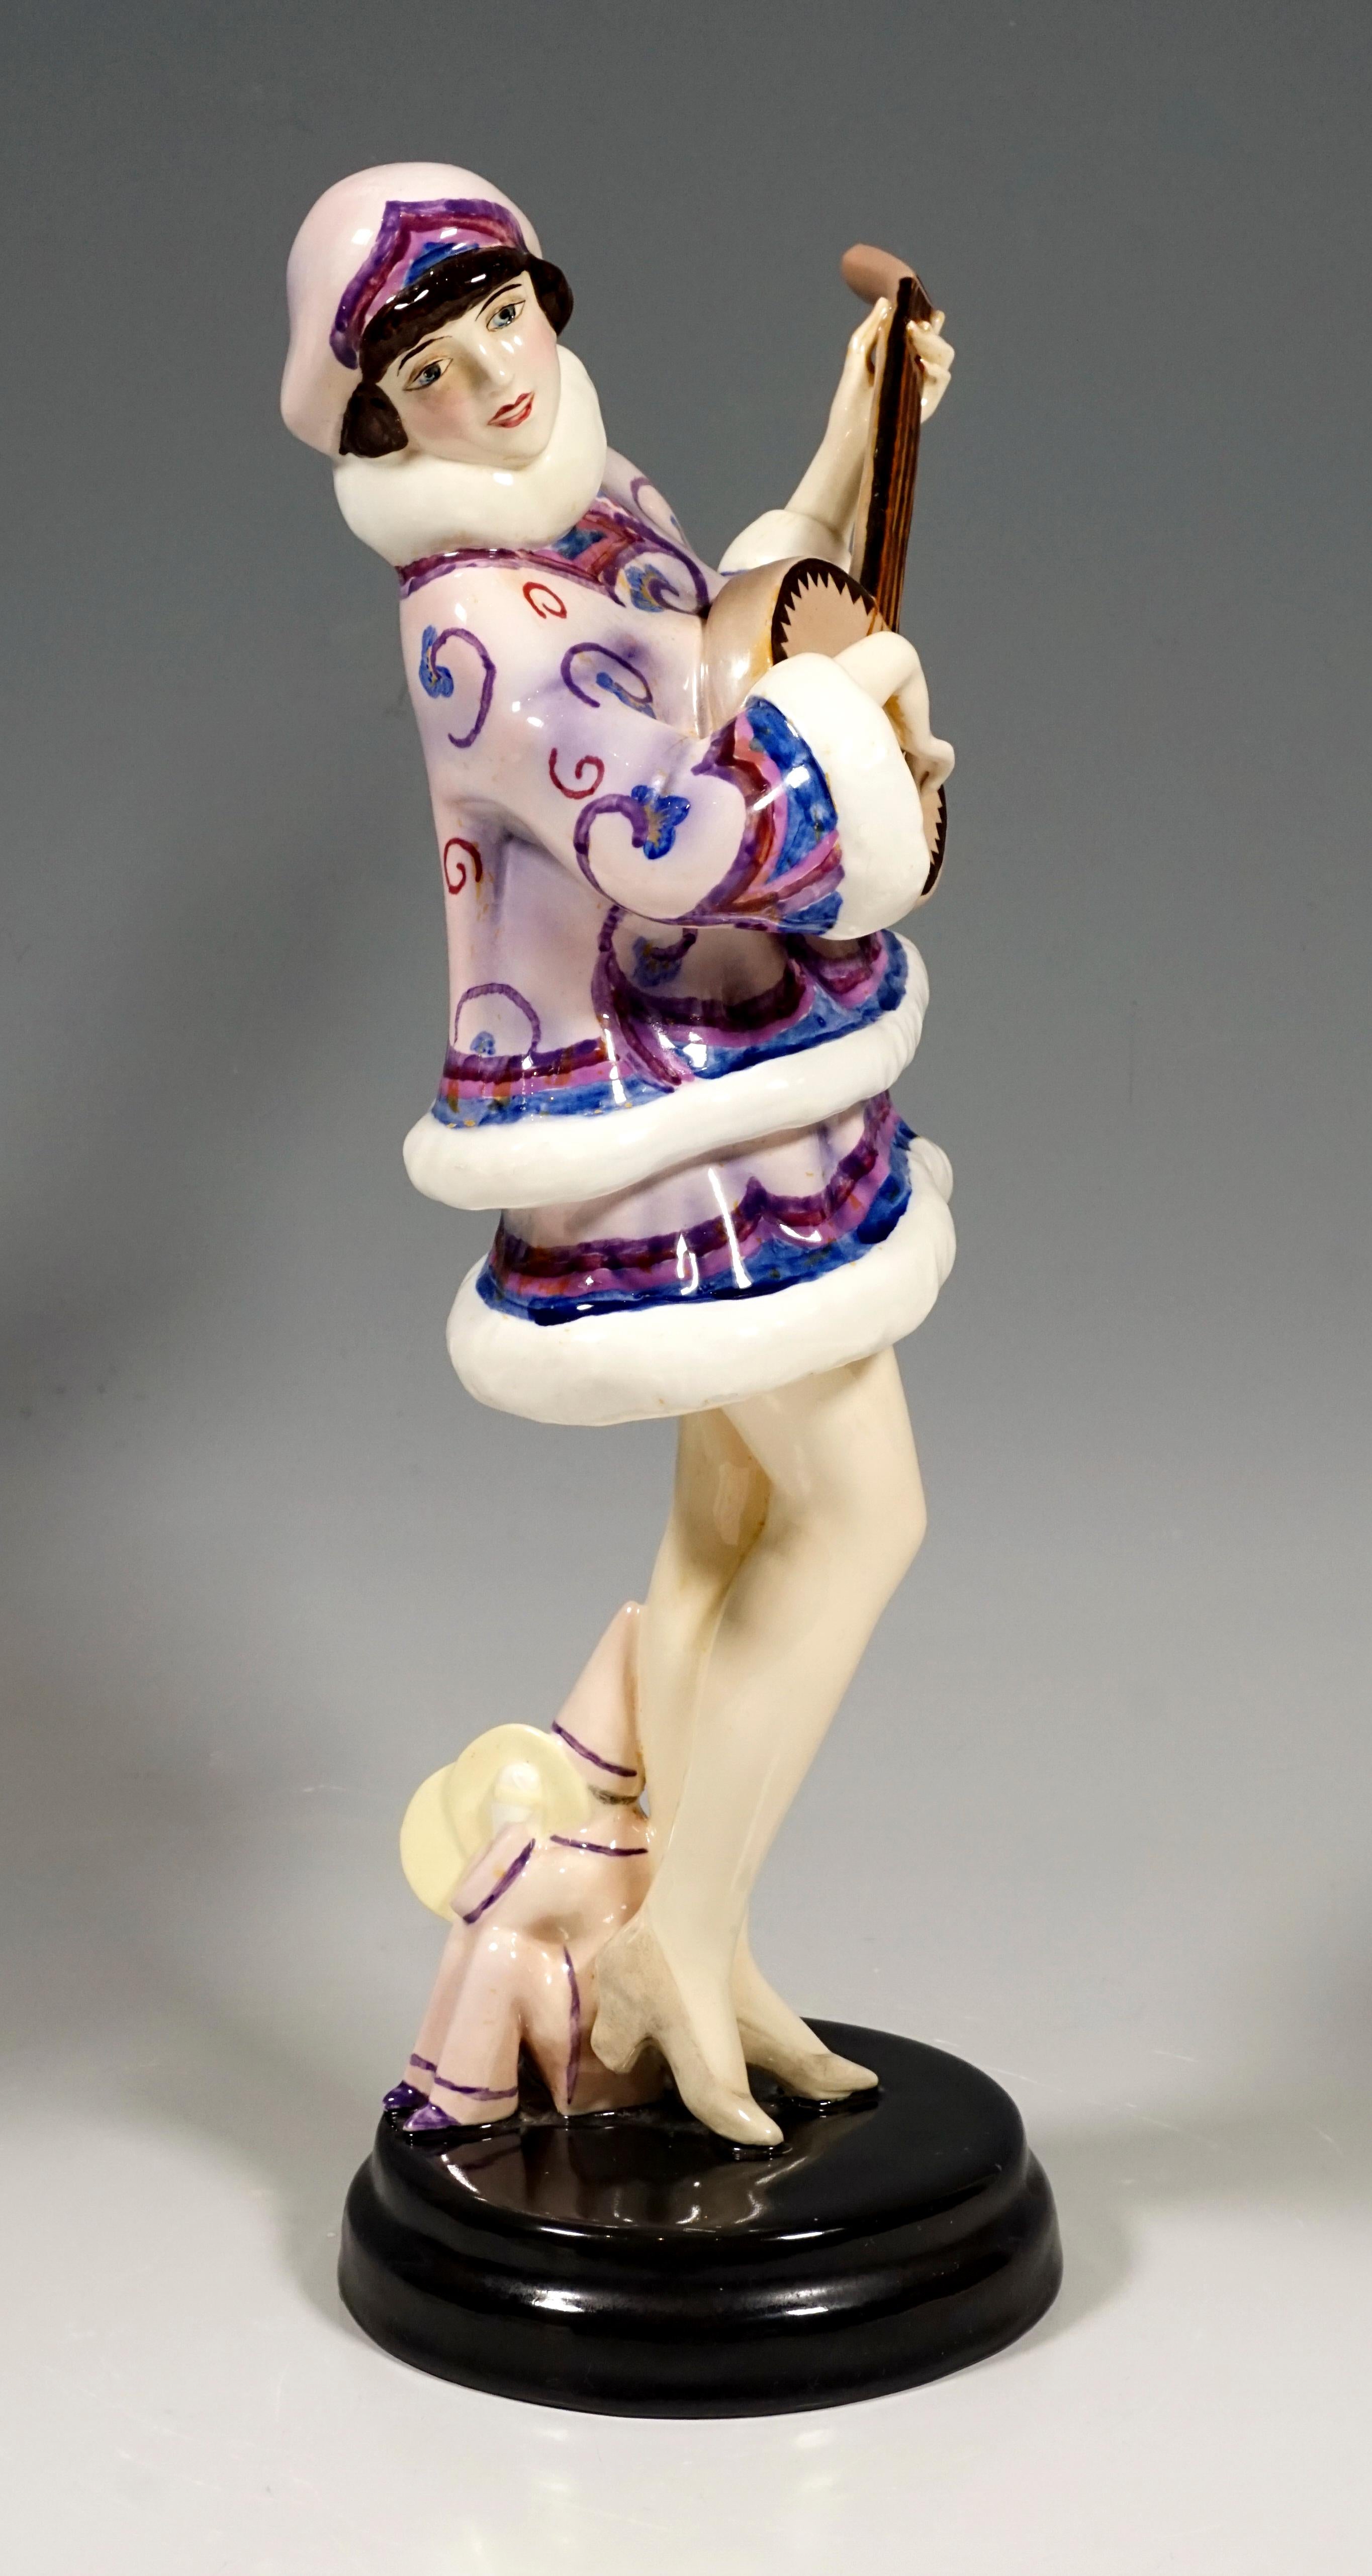 Very rare Art Deco Goldscheider art ceramic figurine around 1930.
Shown is Zerline Balten, a Viennese dancer and actress who accompanies herself on a banjo in her 'fantasy dance'. The young lady wears a winter costume, sweater and skirt in delicate